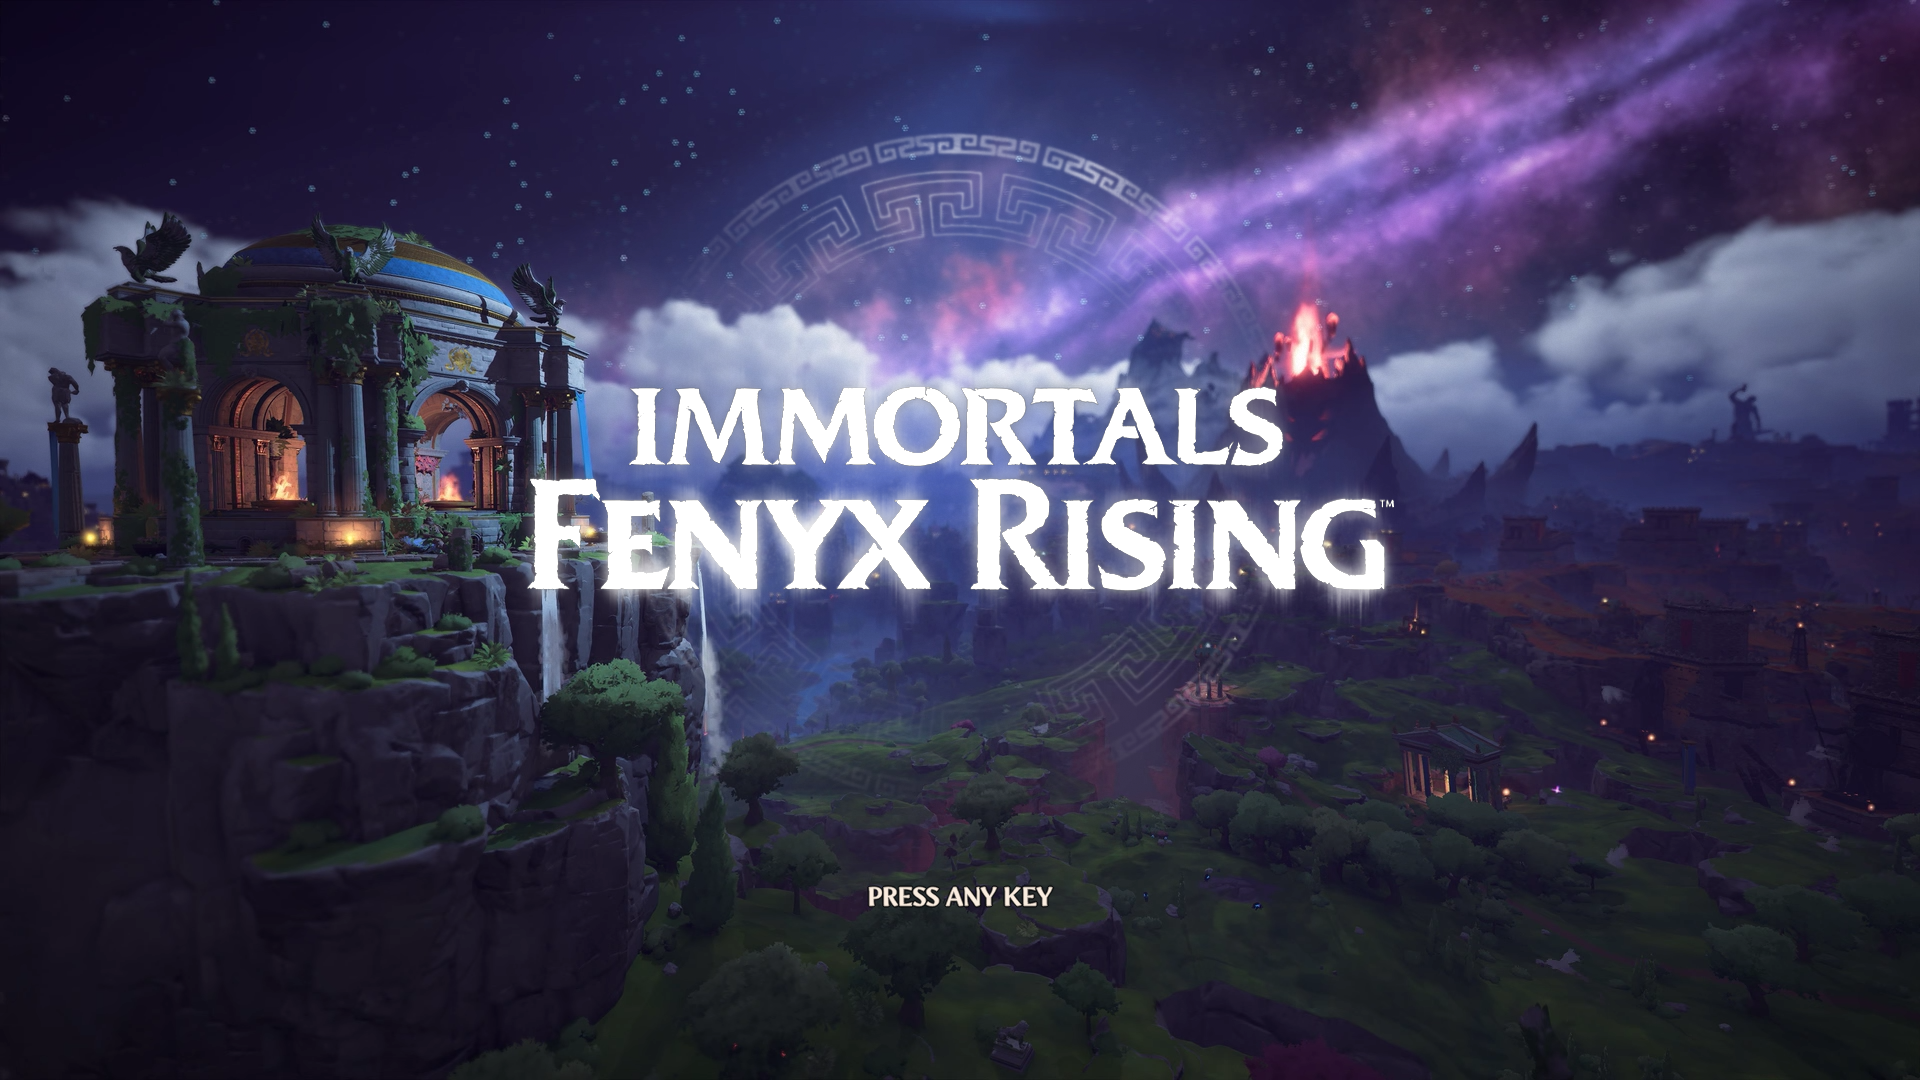 Immortals Fenyx Rising technical review -- Not quite godly